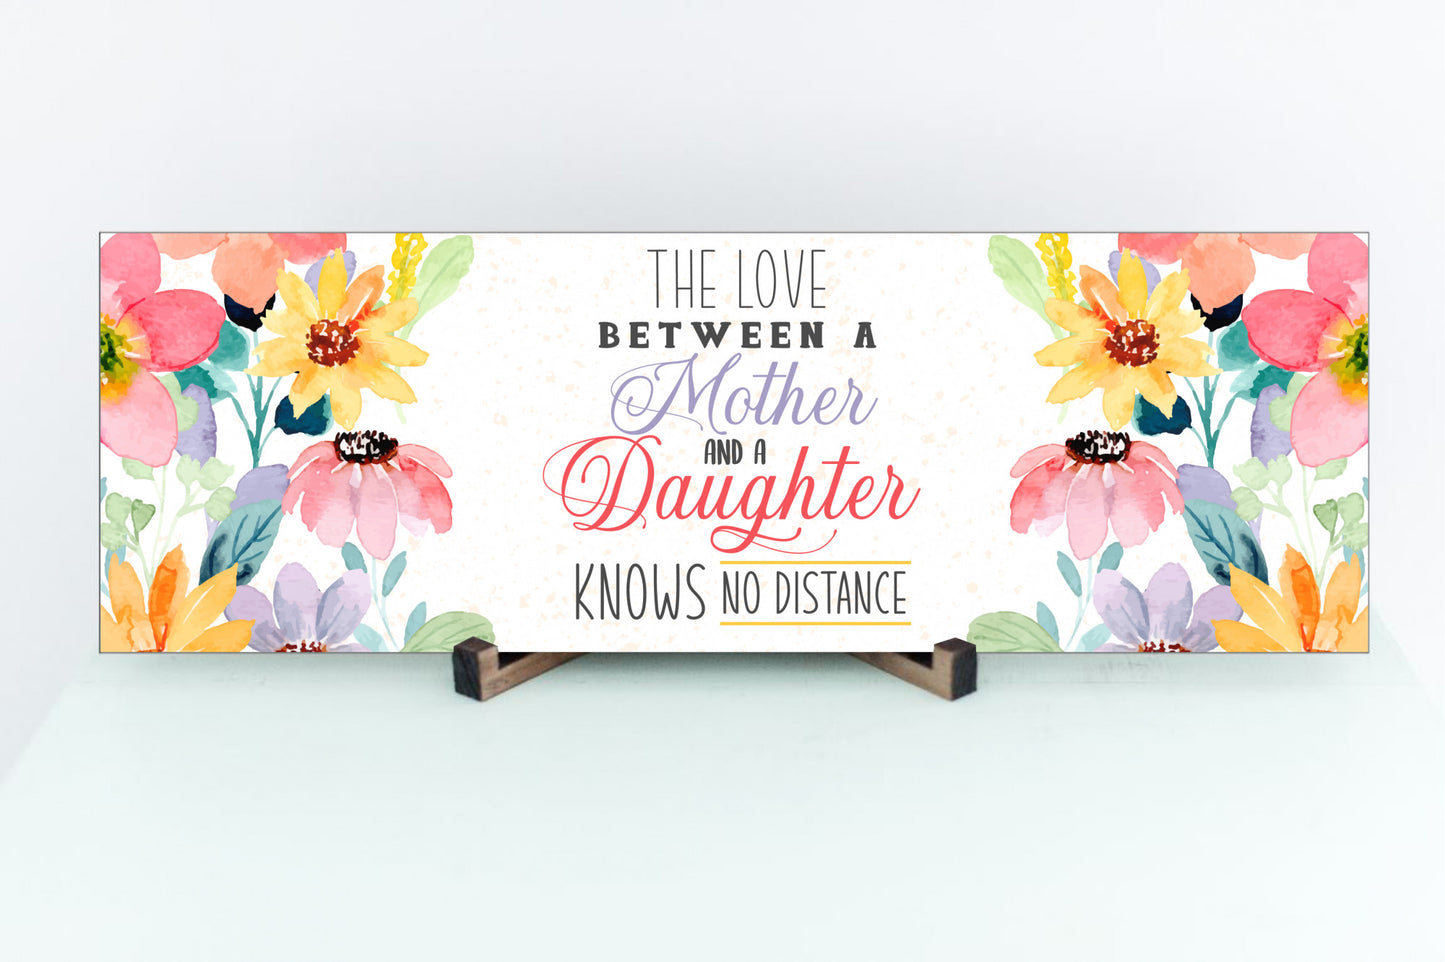 The Love Between A Mother & Daughter Knows No Distance Sign